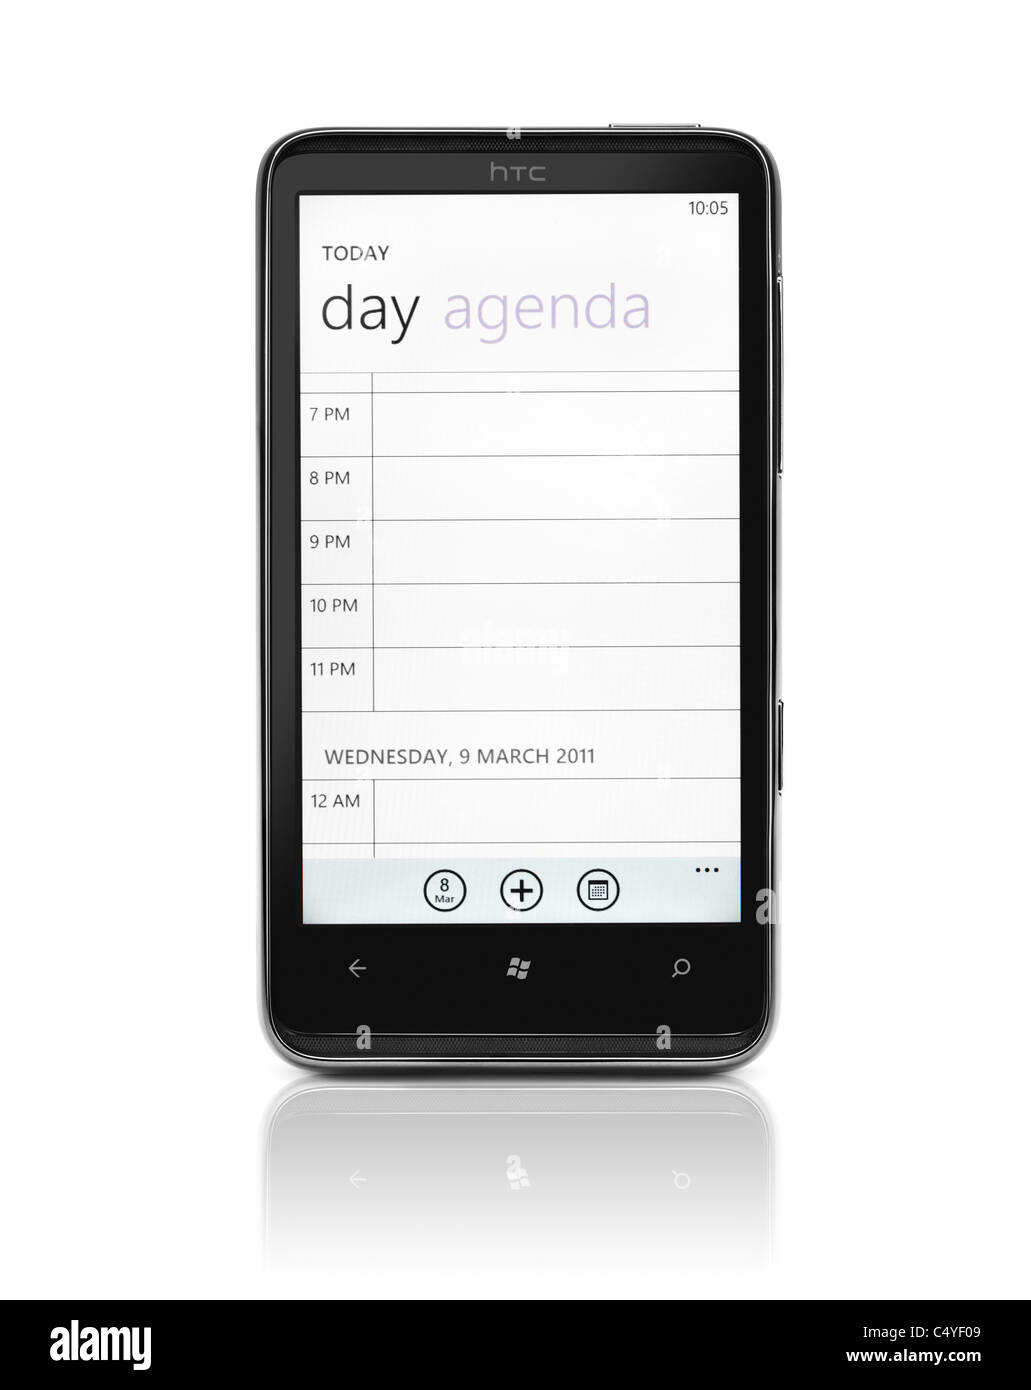 Windows 7 phone. HTC HD7 smartphone with day agenda organizer on its display isolated on white background. High quality photo. Stock Photo